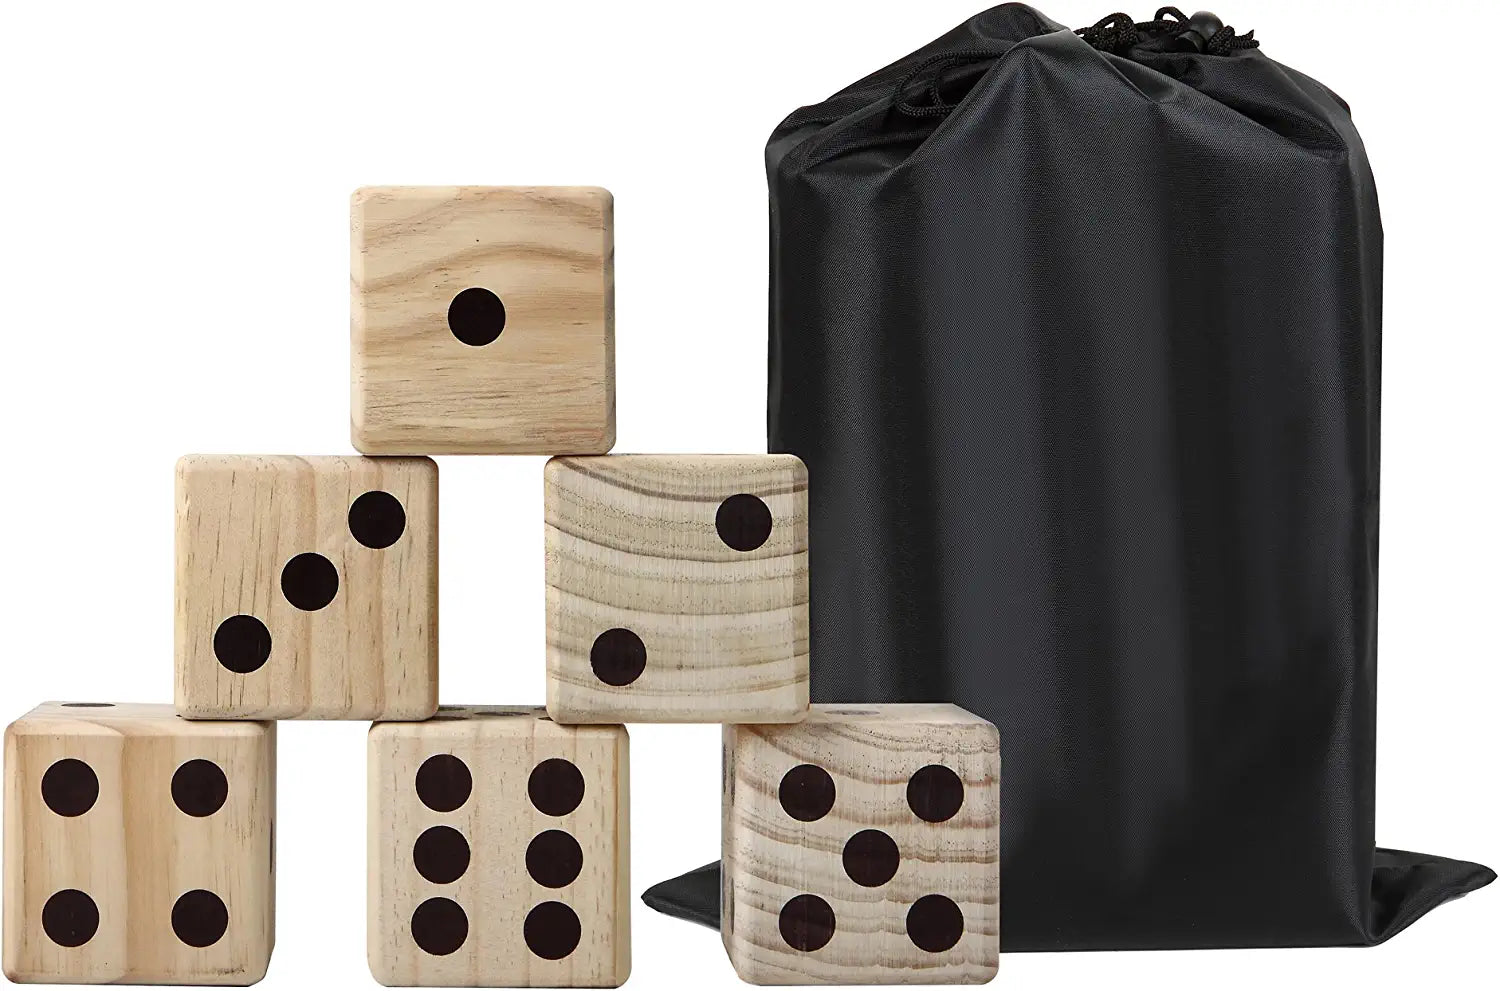 Hathaway High Roller yd Dice Set with 6 x 3.5-in Wooden Dice &amp; Black Nylon Storage Bag, Reusable Scorecard Included yd Dice, Wood